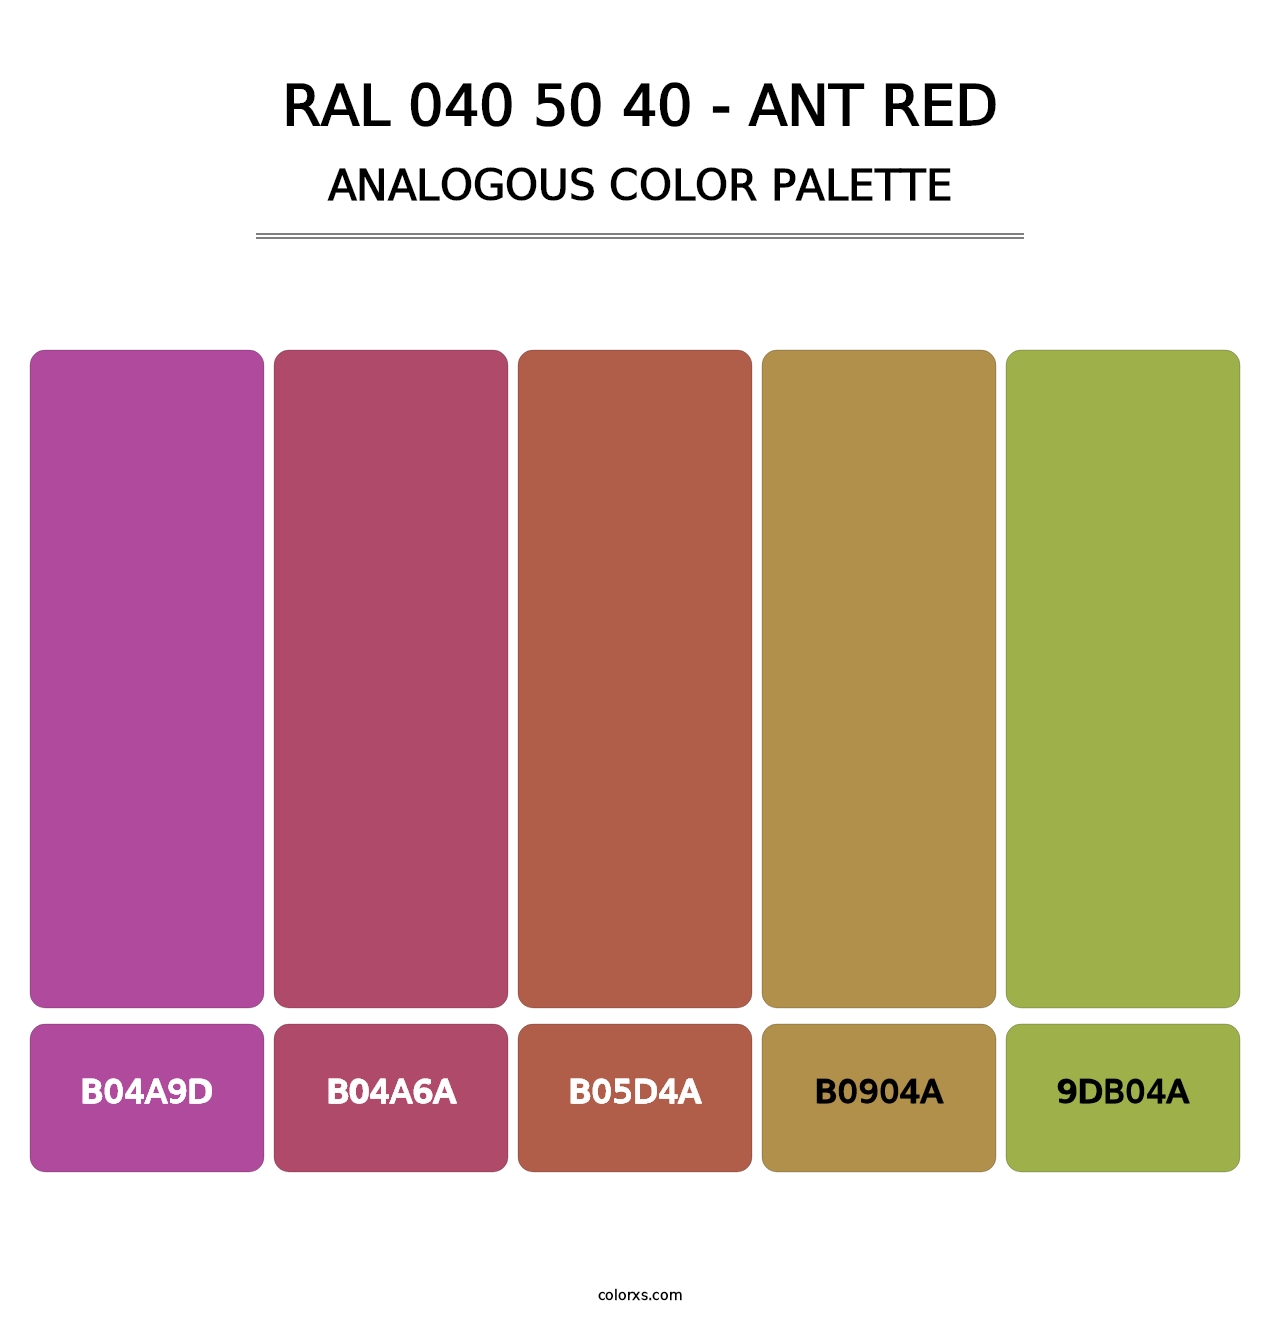 RAL 040 50 40 - Ant Red - Analogous Color Palette